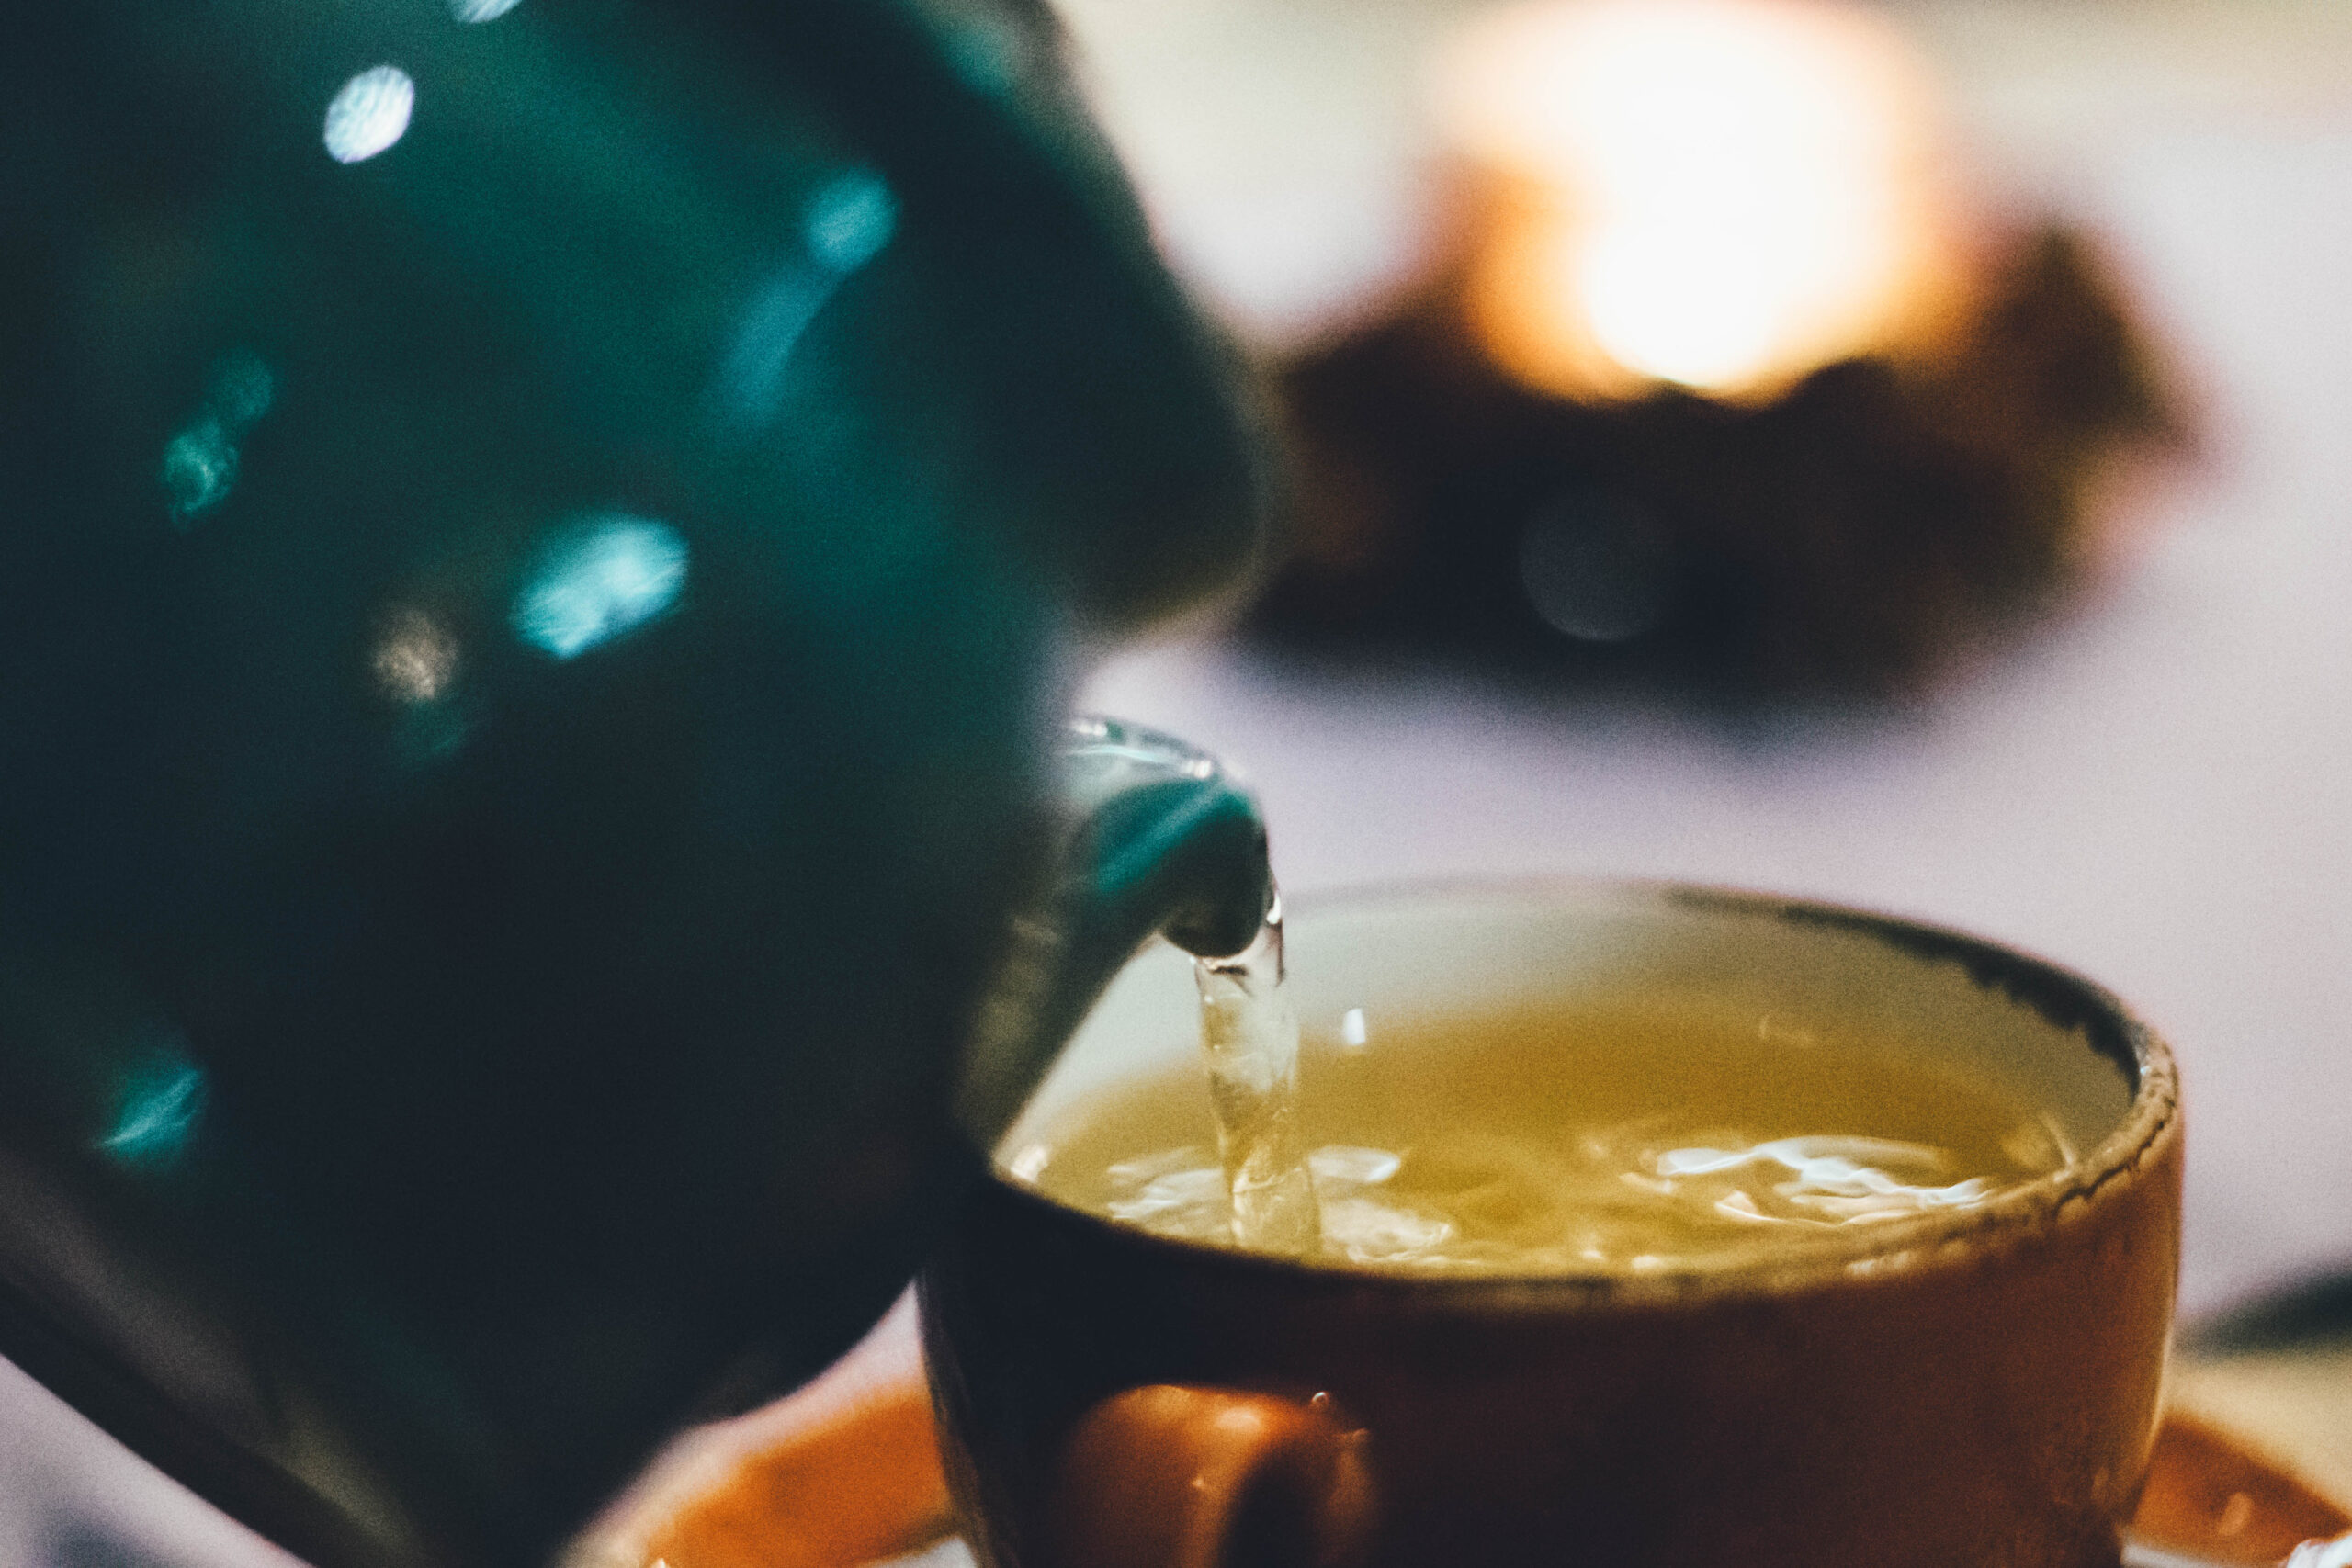 The Teas You Should Drink & Avoid During Your Period